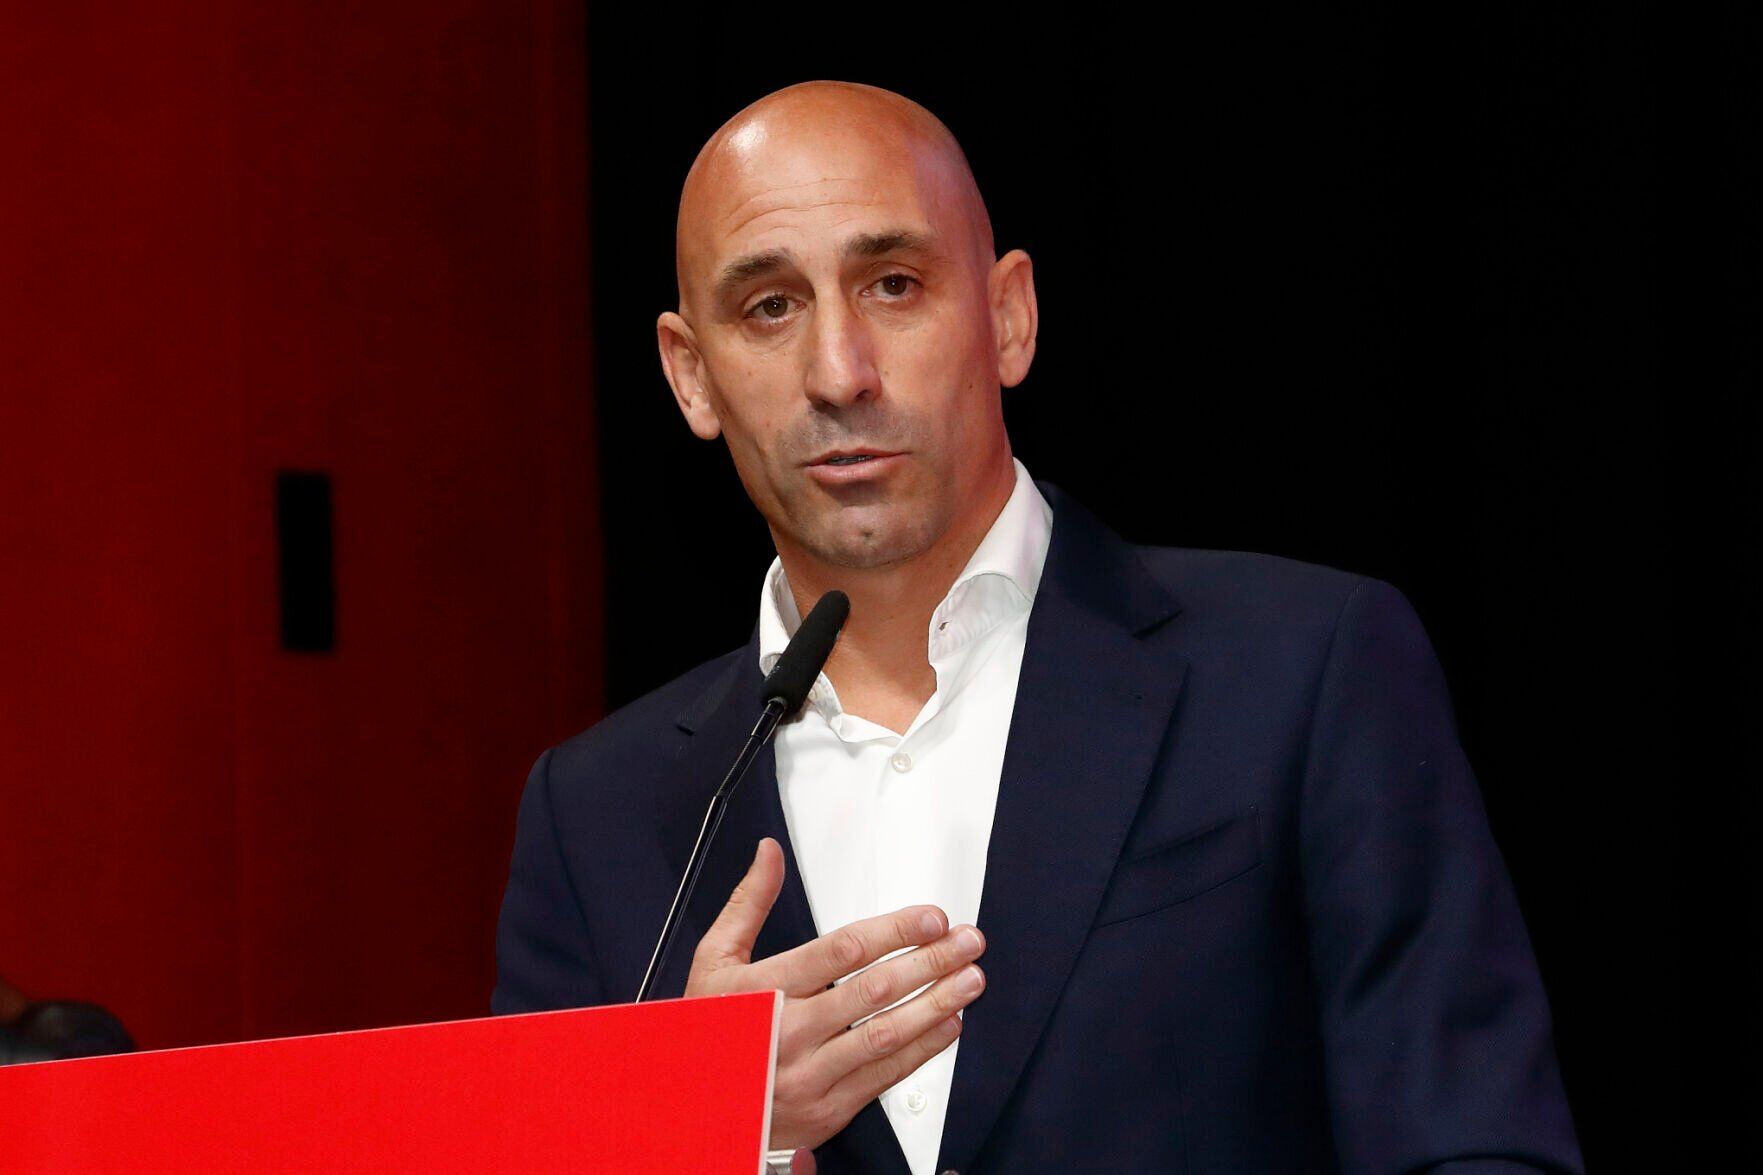 Rubiales resigns after kiss scandal at World